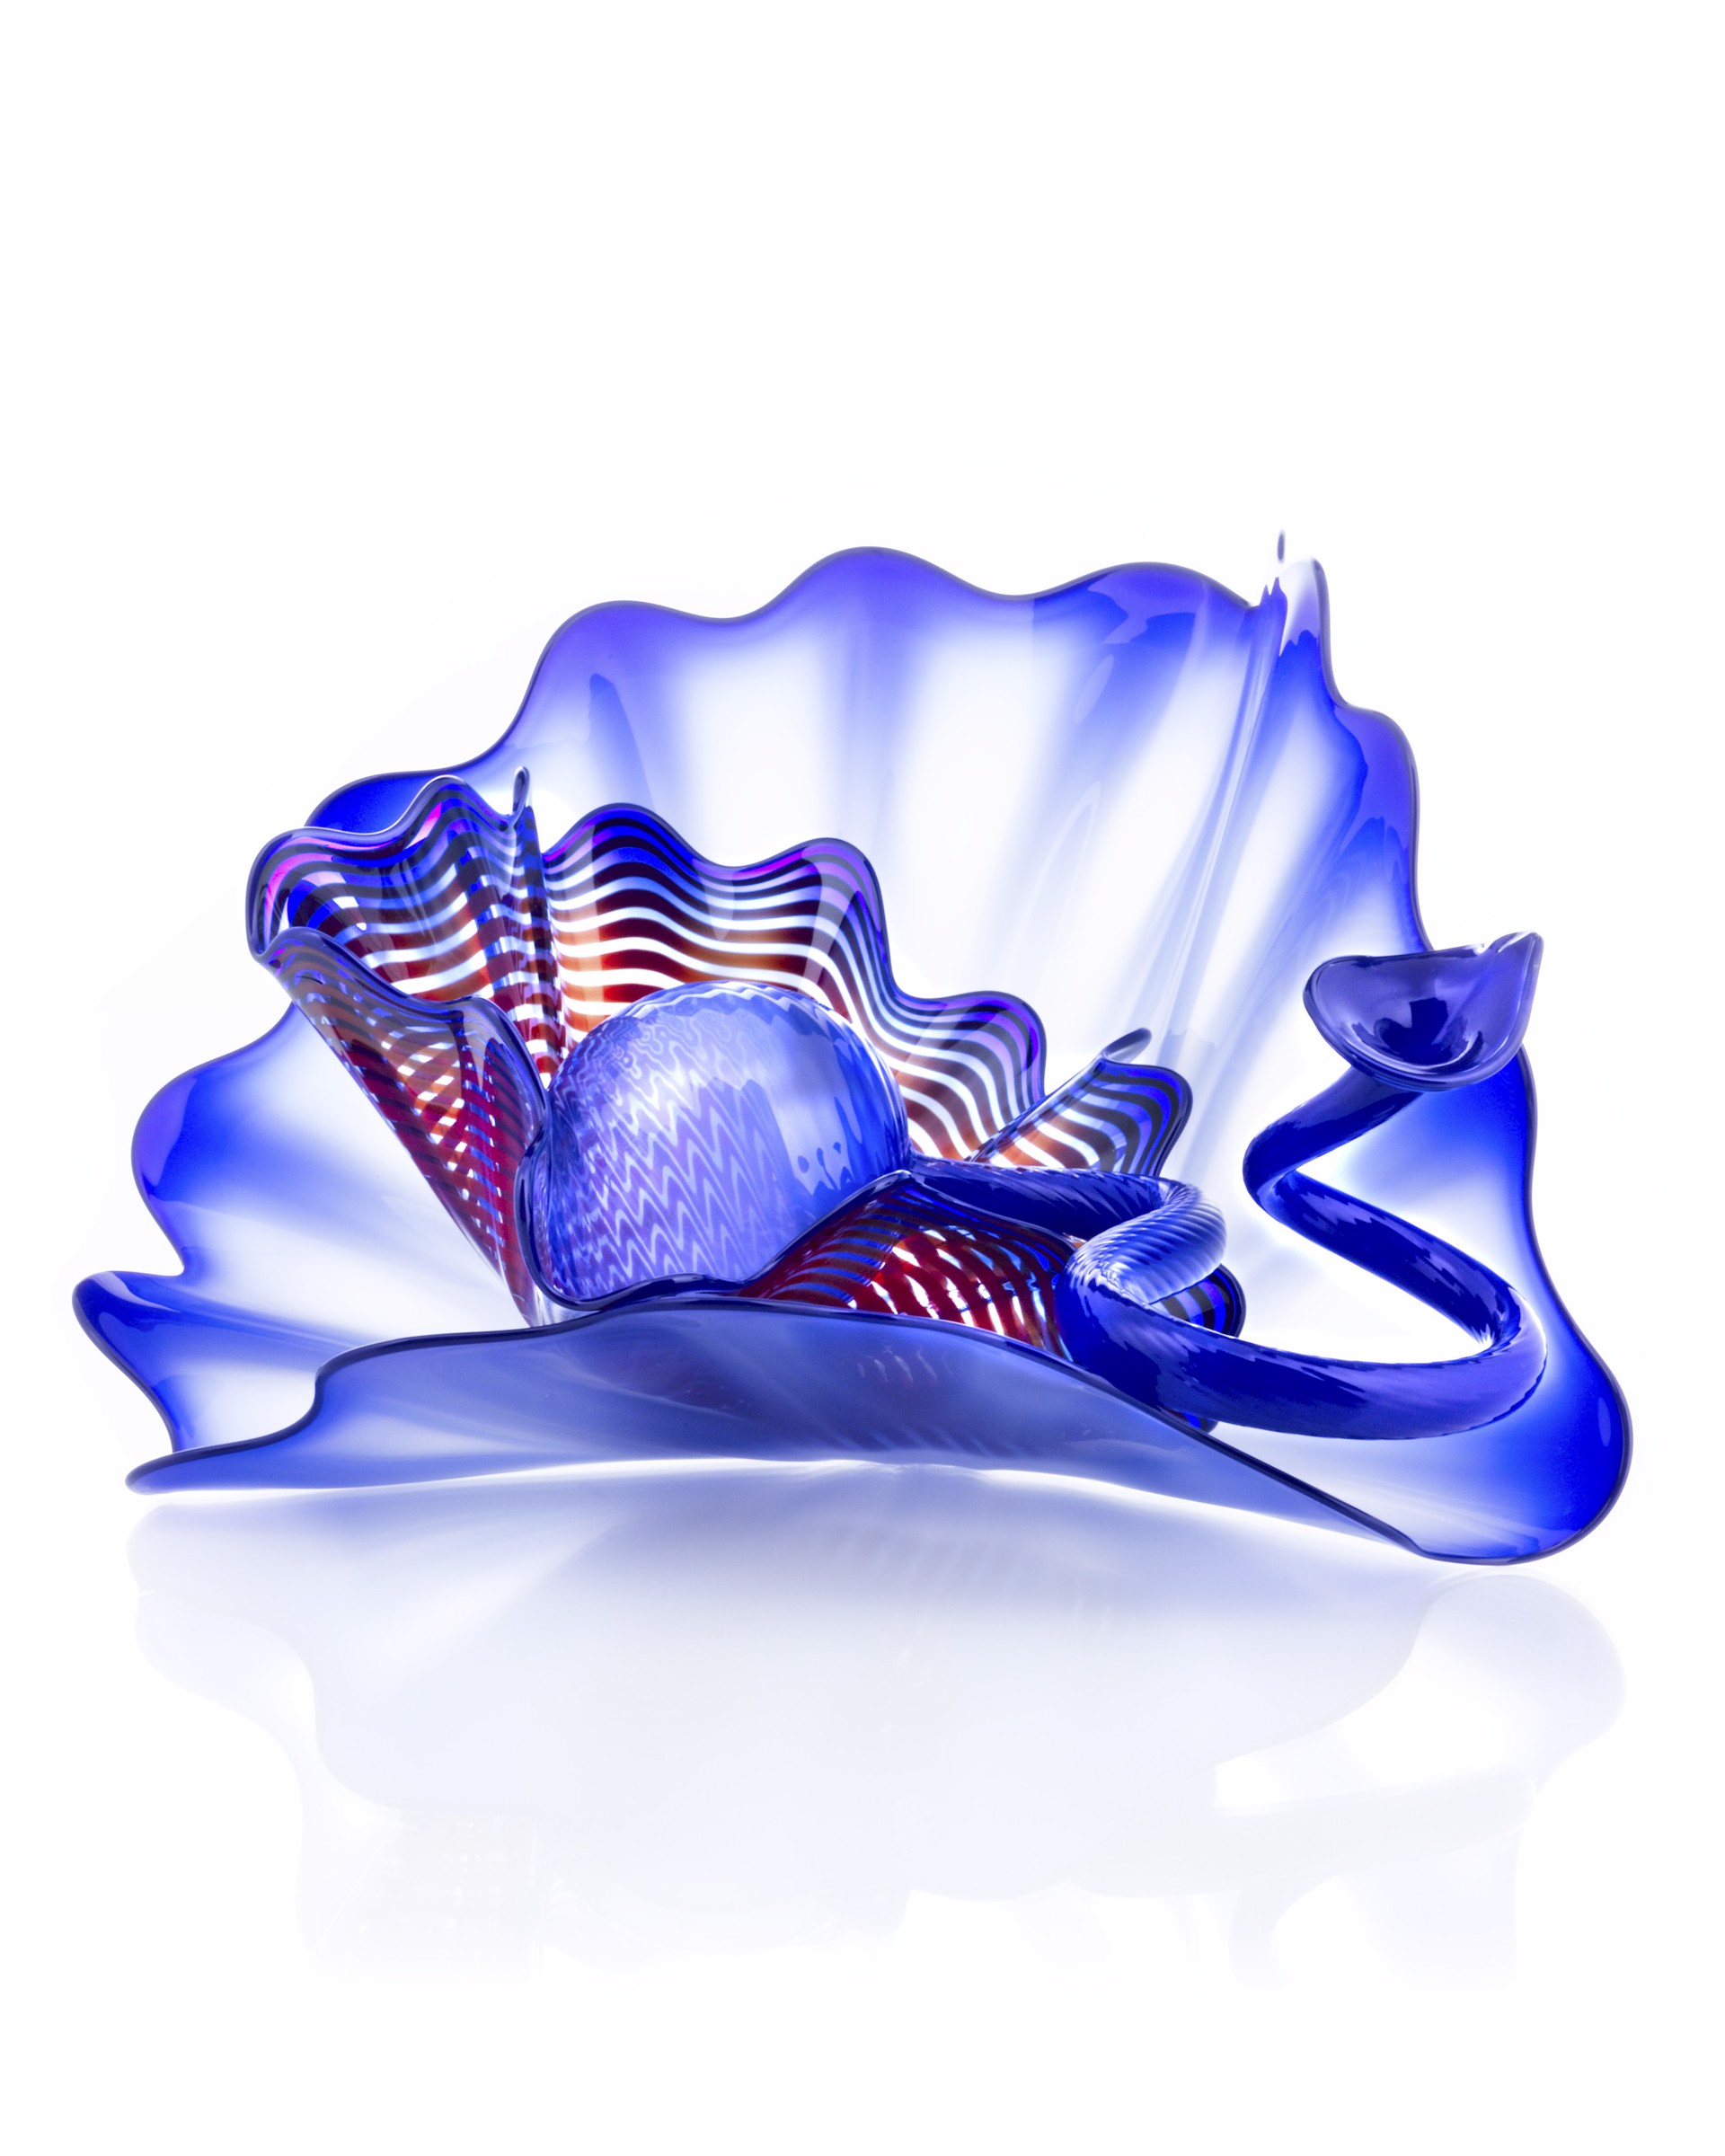 Byzantine Blue Persian Studio Edition 2017 by Dale Chihuly